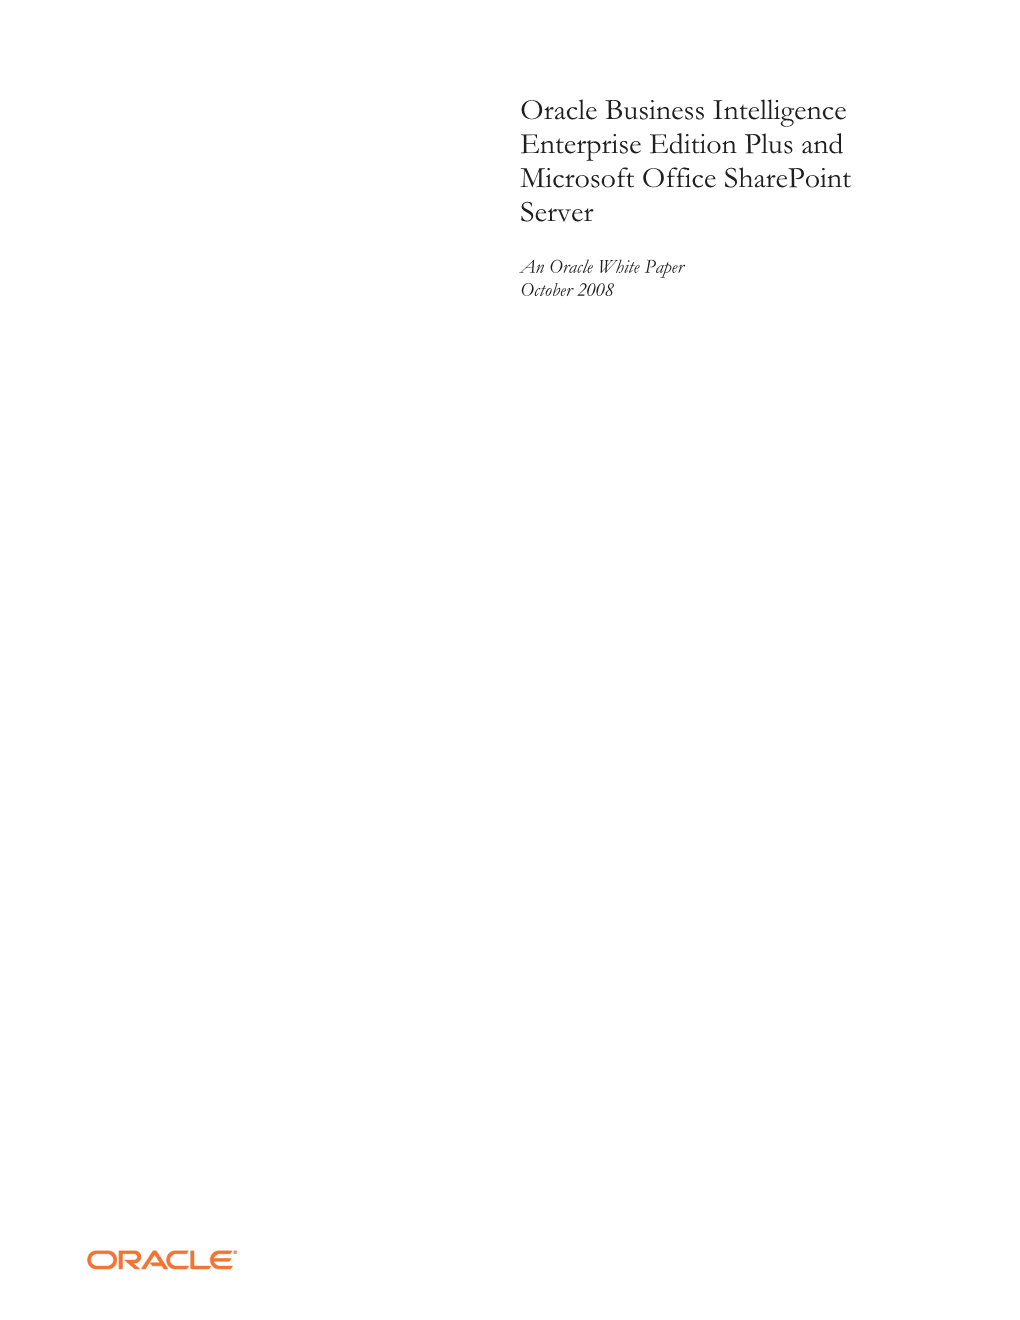 Oracle Business Intelligence Enterprise Edition Plus and Microsoft Office Sharepoint Server